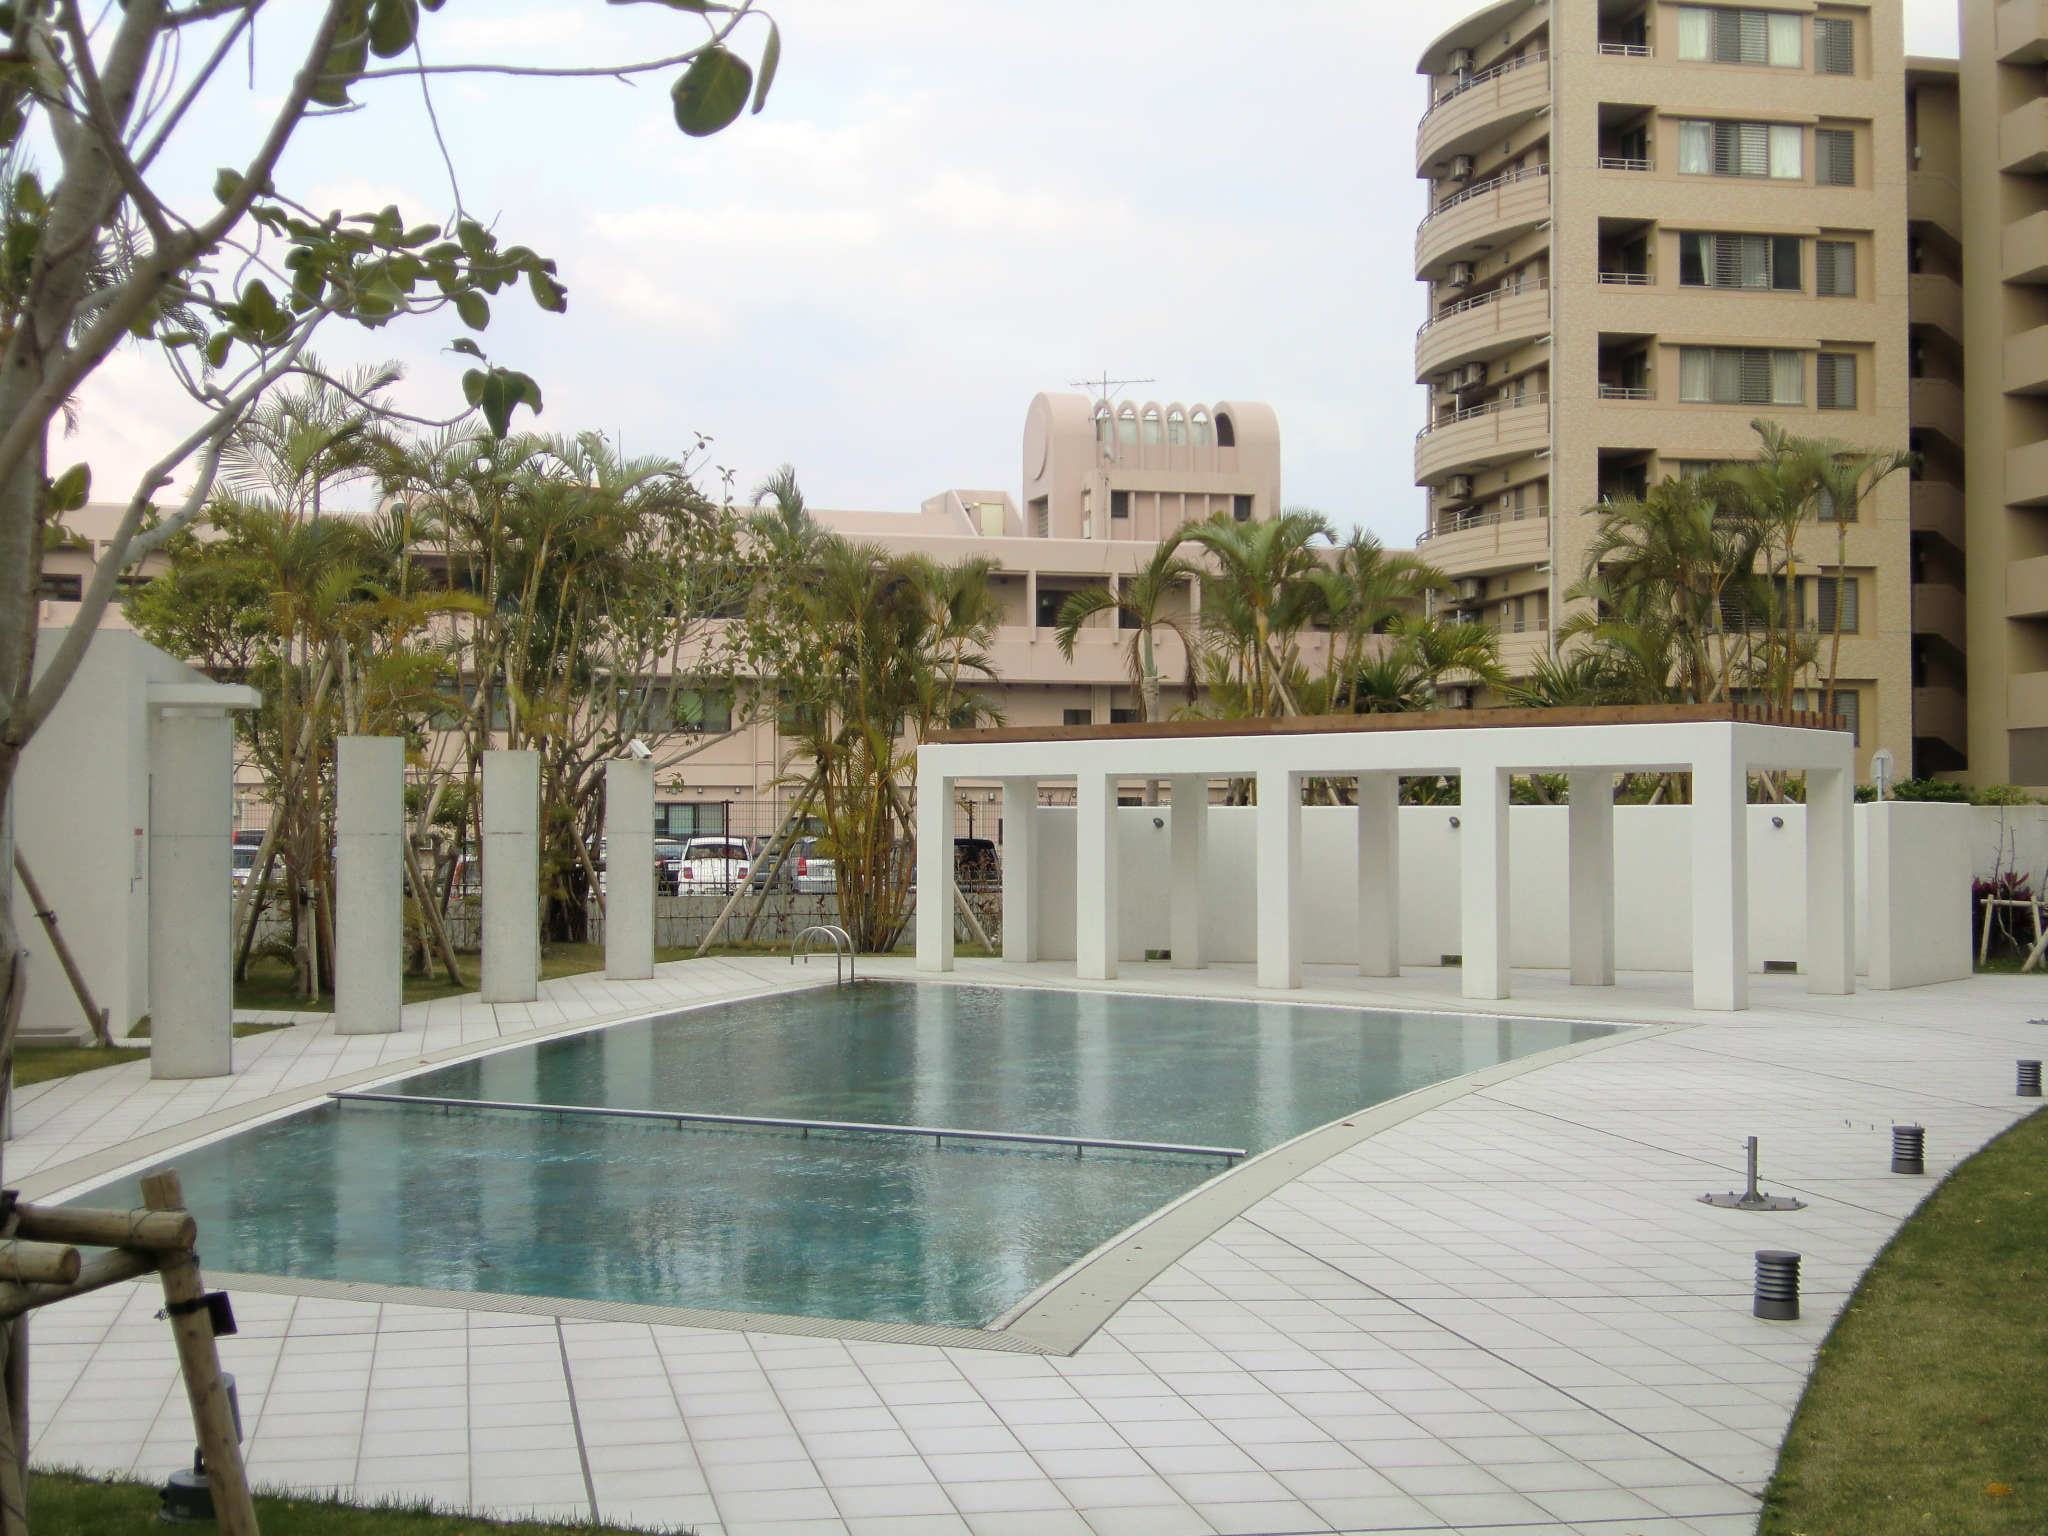 Apartments for Rental in Okinawa